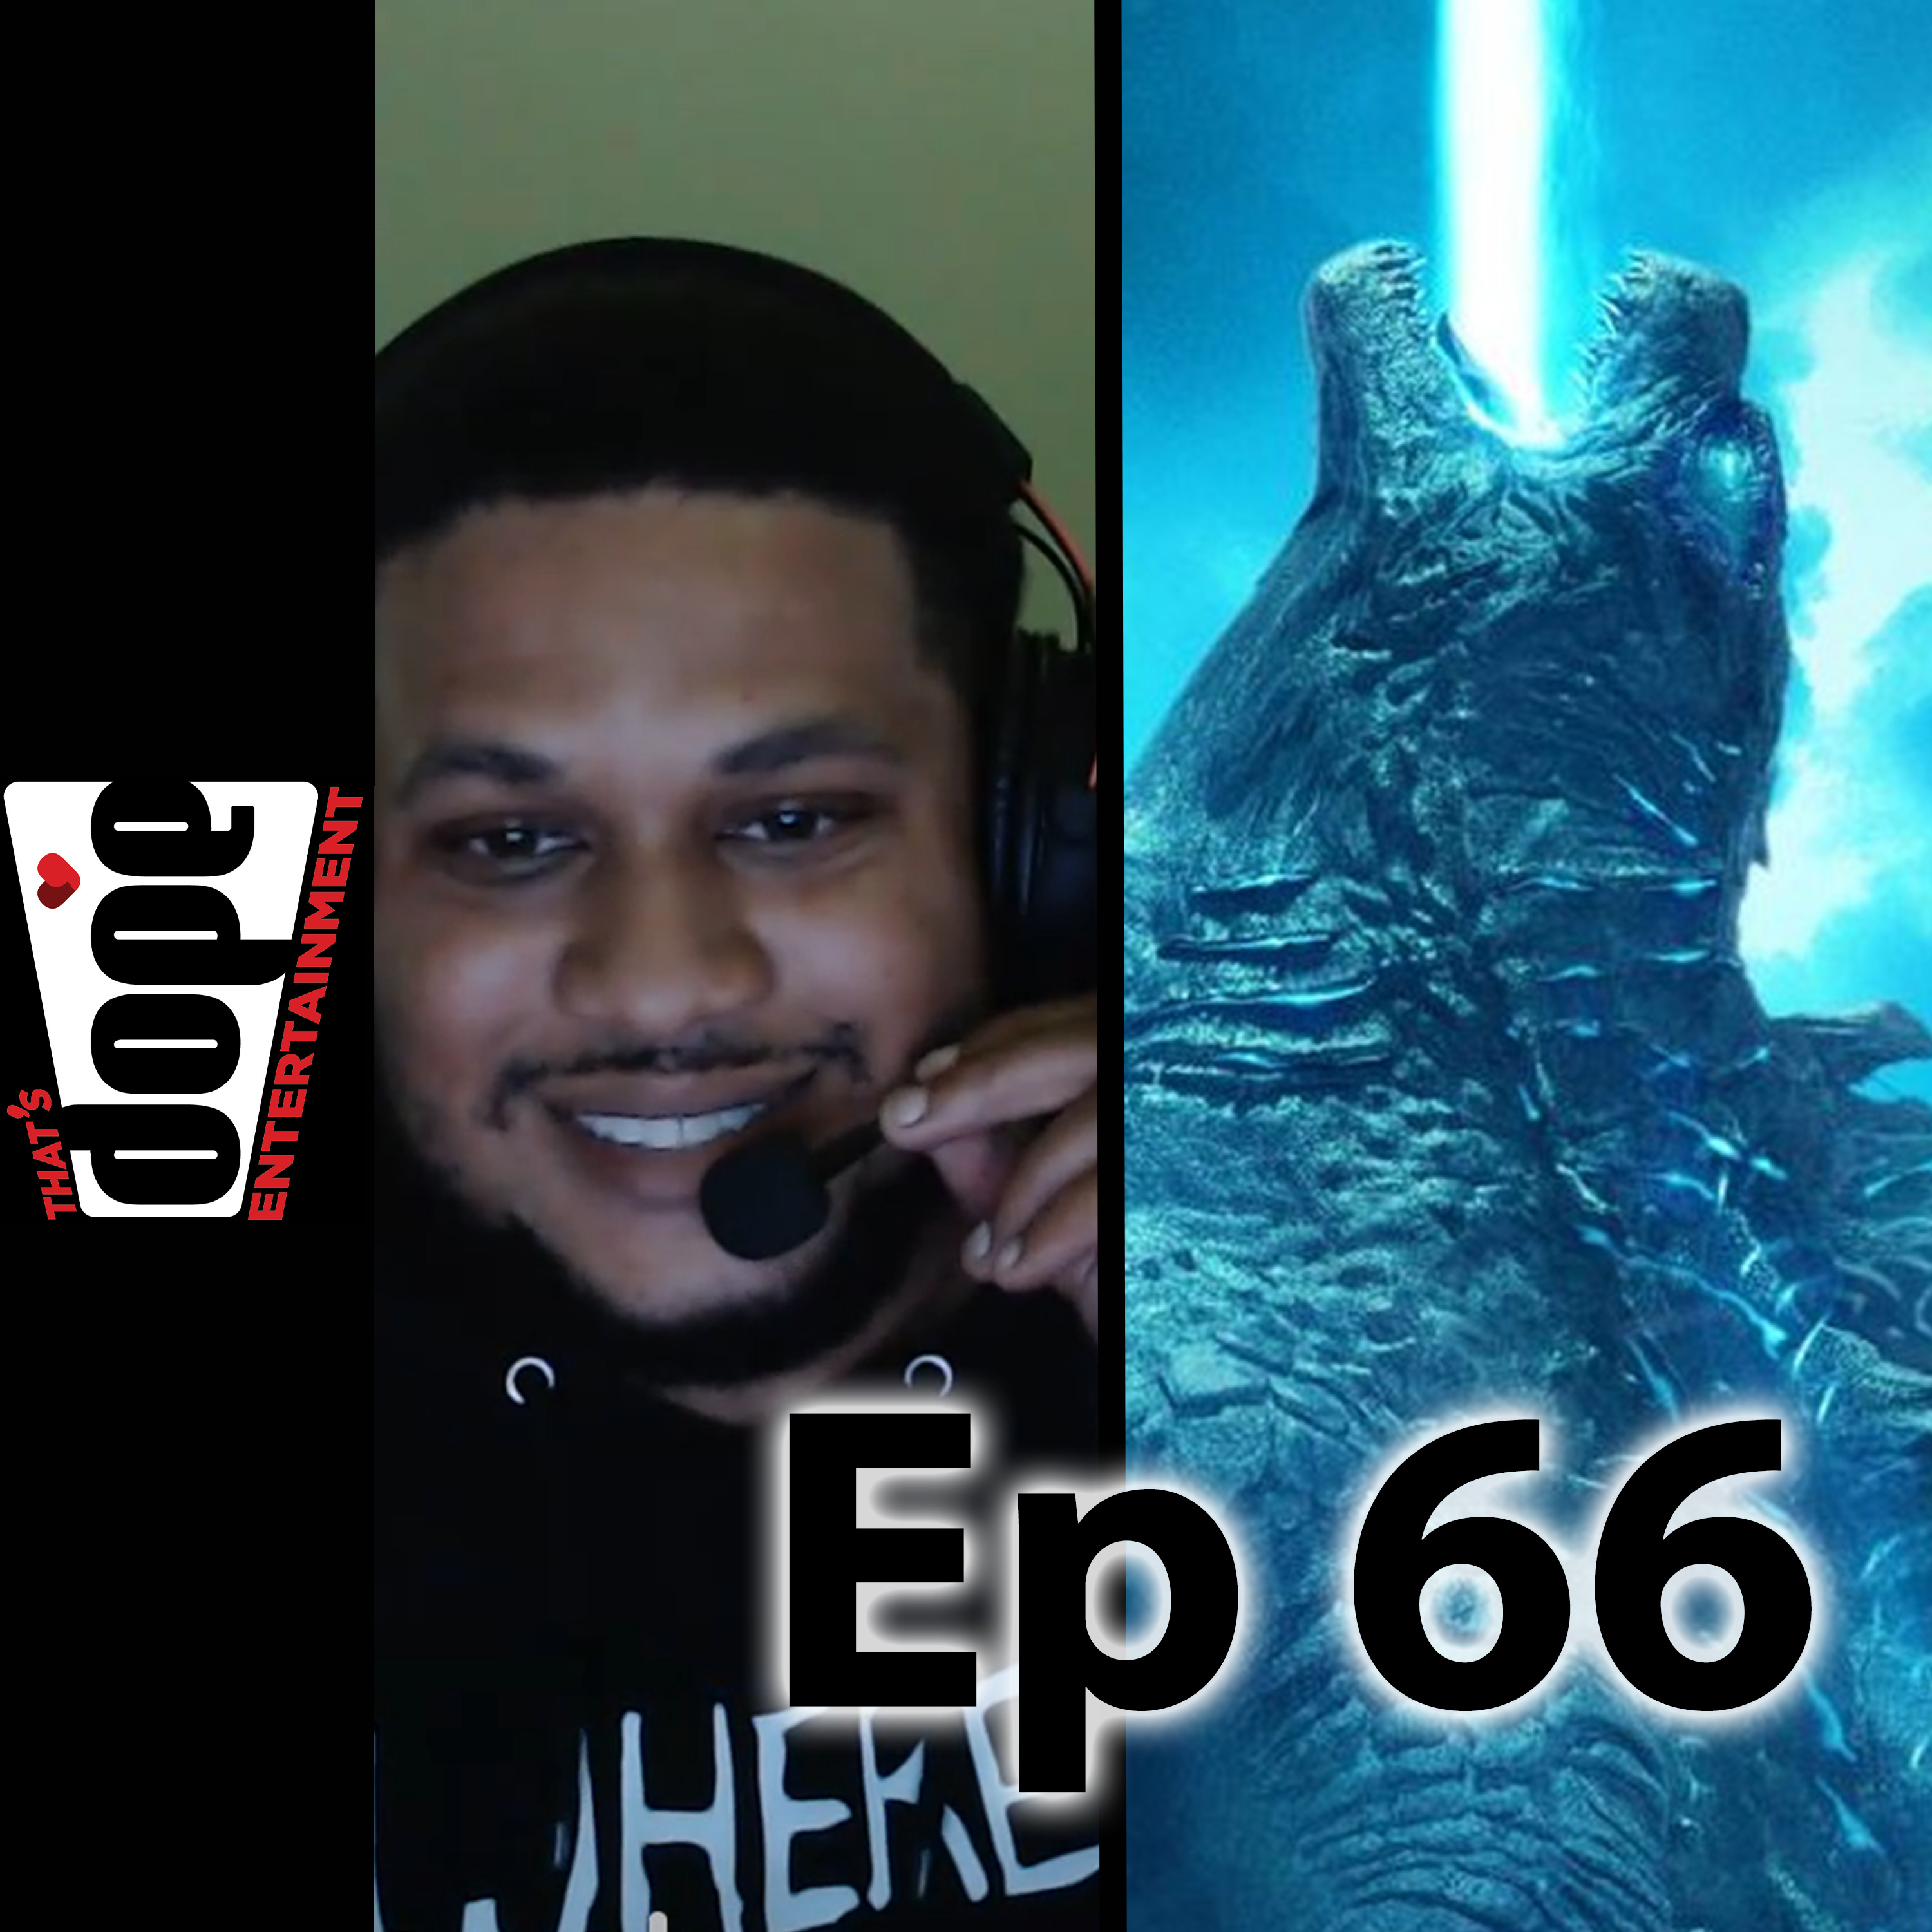 Godzilla, Kong, Vaccines, and of course Anime w/ Delmar